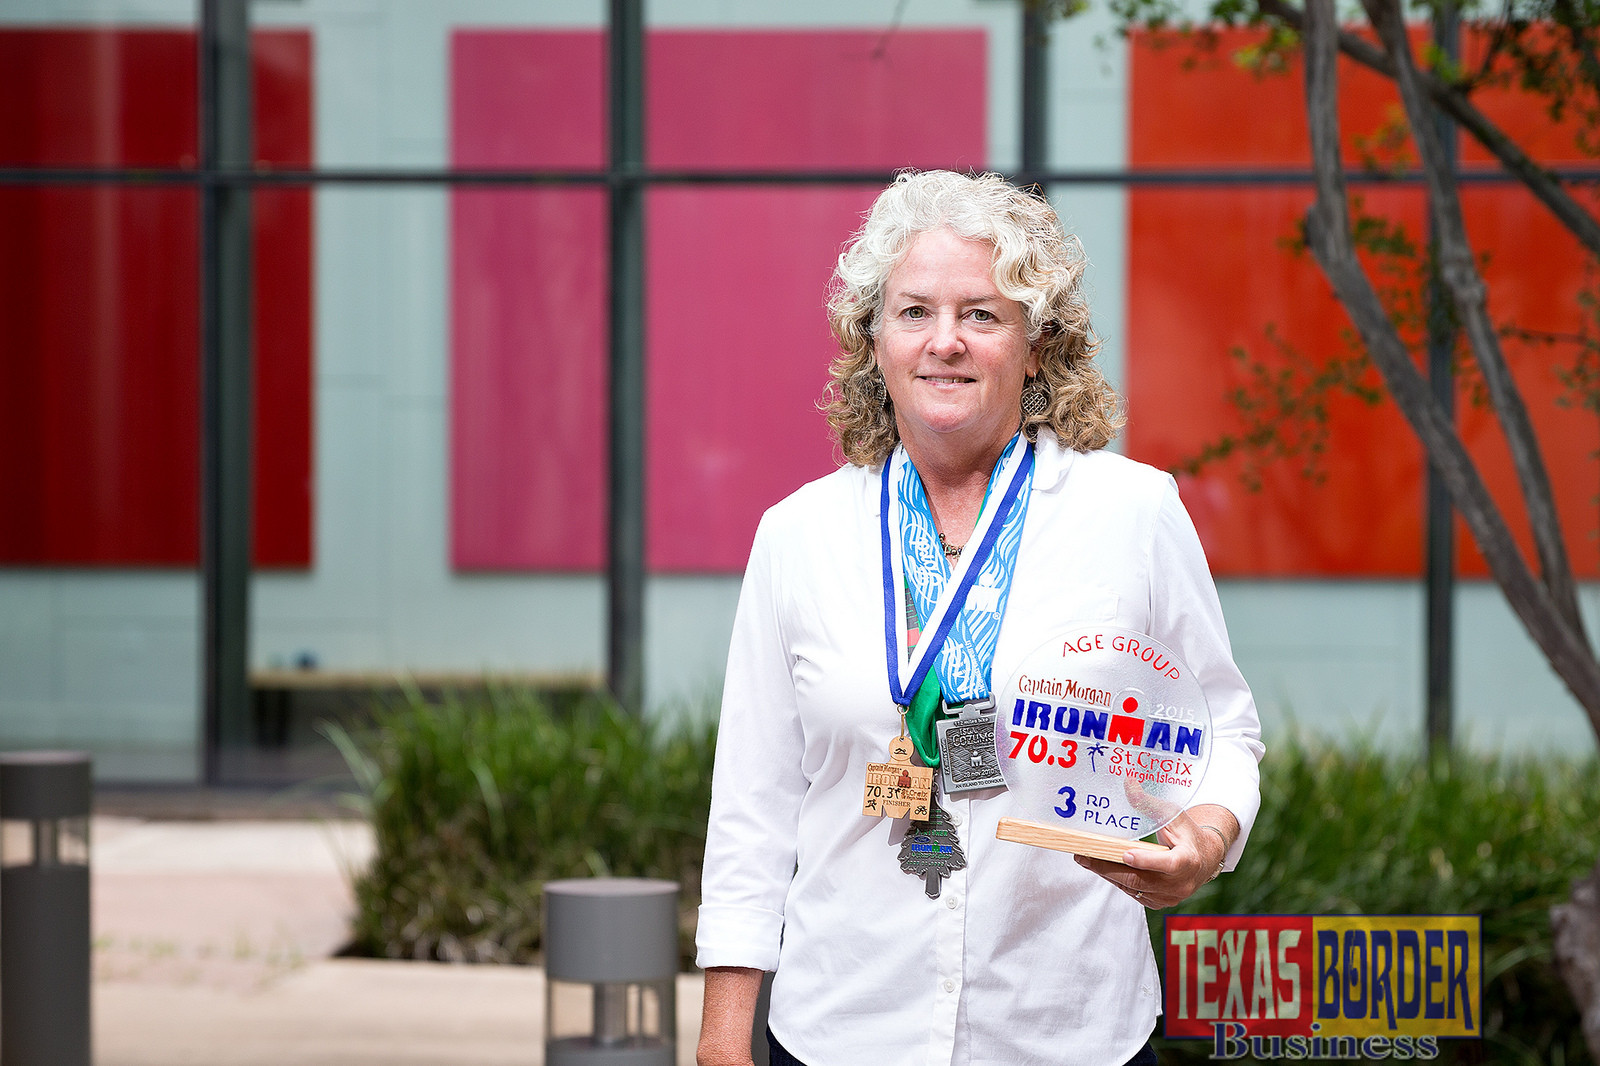 Dr. Karen Watt, a professor in the UTRGV Department of Organization and School Leadership, is currently in training for her third full Ironman Triathlon competition on Nov. 5 in Florida. Seen here on the UTRGV Edinburg Campus, she is holding awards and medals from her first two Ironman Triathlons. (UTRGV Photo by Paul Chouy)